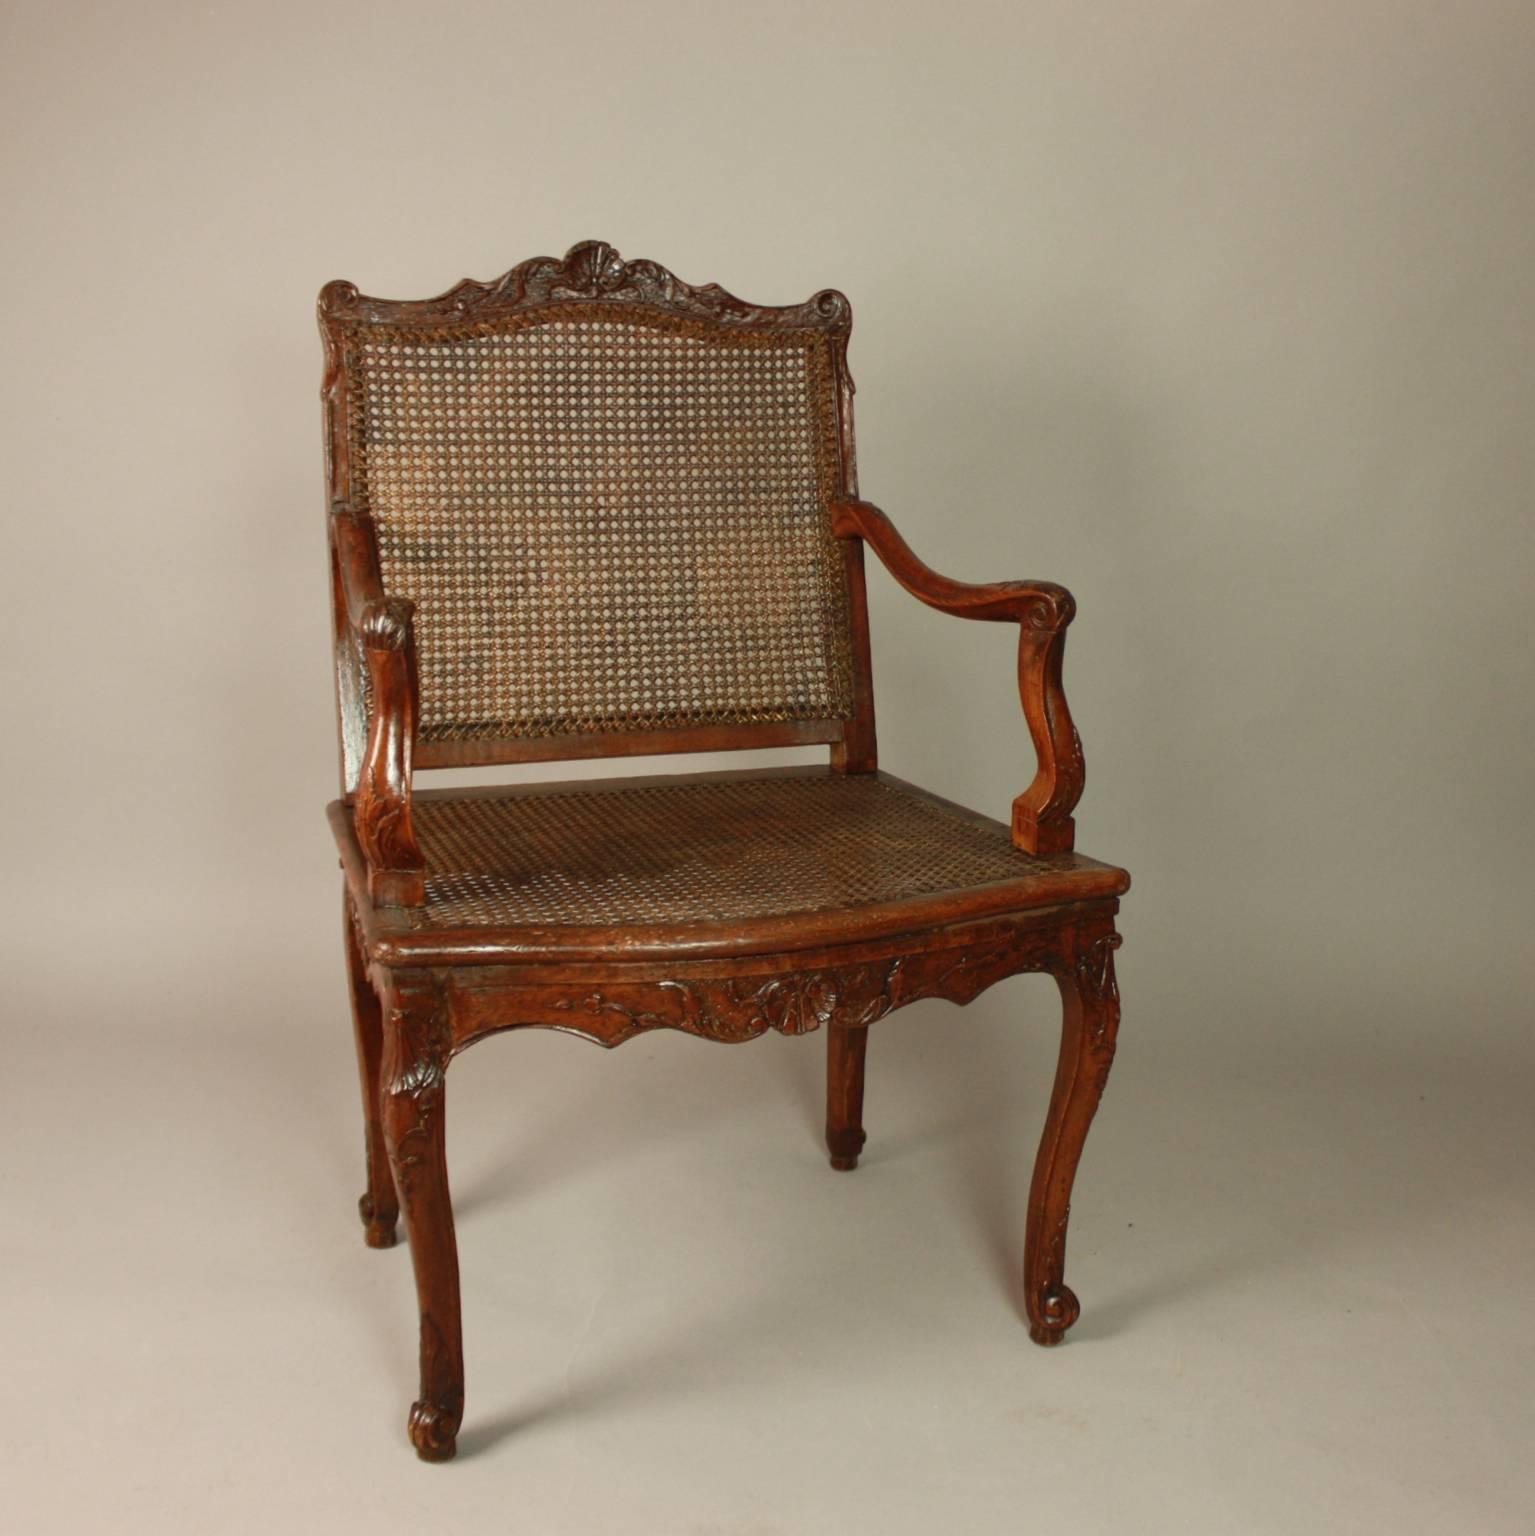 A beautiful Regence caned armchair with a finely carved decoration featuring a symmetrical design of shells, scrolls and pendants of flowers. The back and seat are caned with a rather close mesh. The rectangular back with fine carving on the top